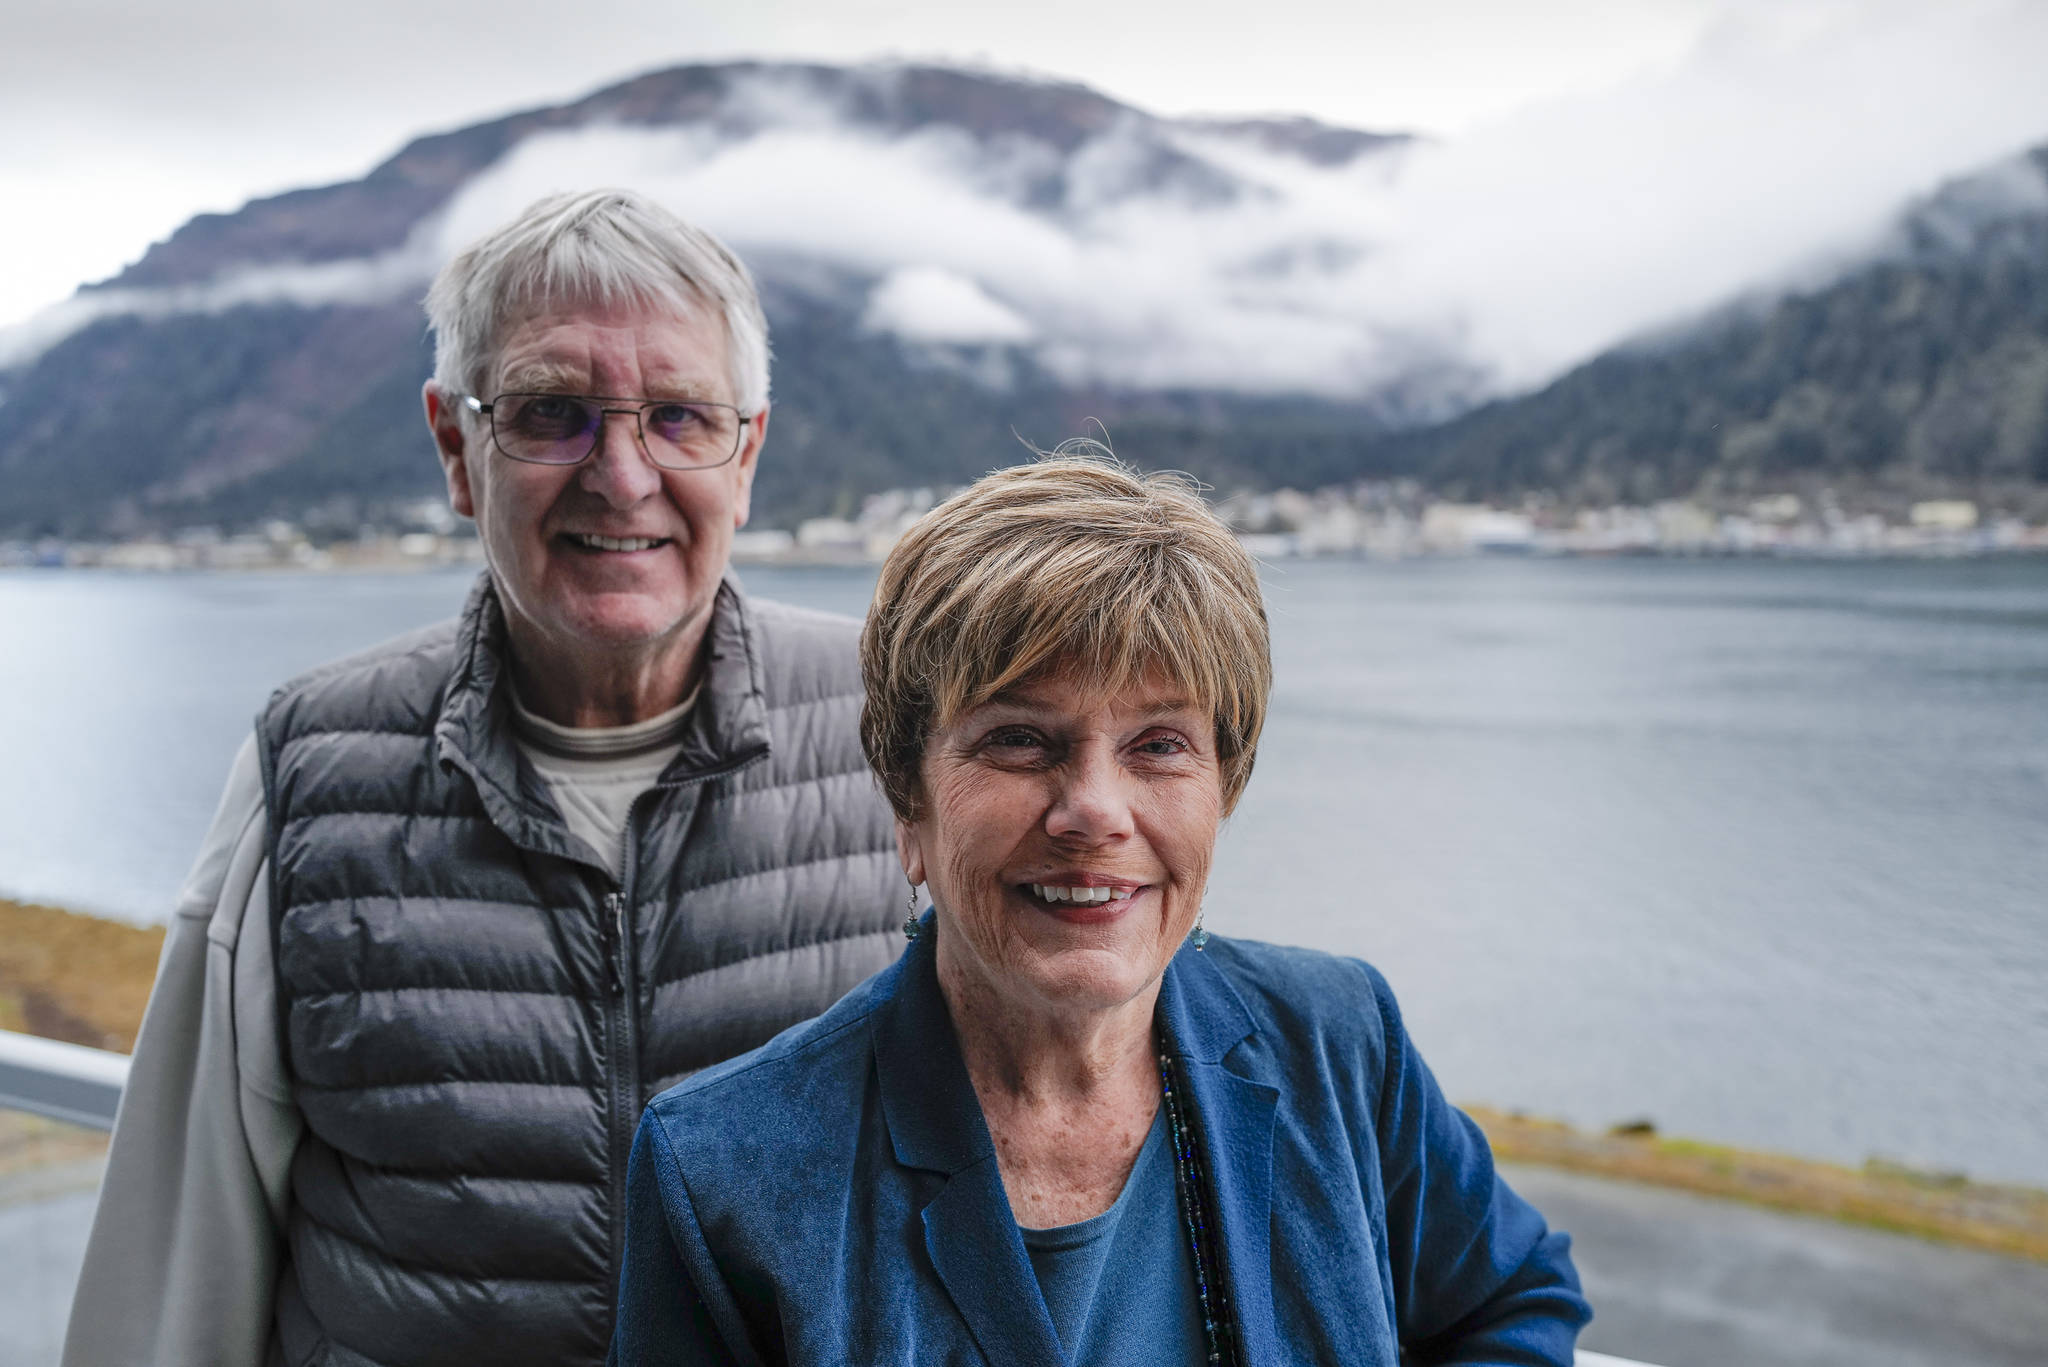 Mary and Jim Becker pose for a picture at their Douglas home on Monday, Oct. 28, 2019. The Beckers were given dual Lifetime Achievement Awards by the Juneau Chamber of Commerce during their annual dinner at Centennial Hall on Saturday. Learn more about them by watching the video below. (Michael Penn | Juneau Empire)